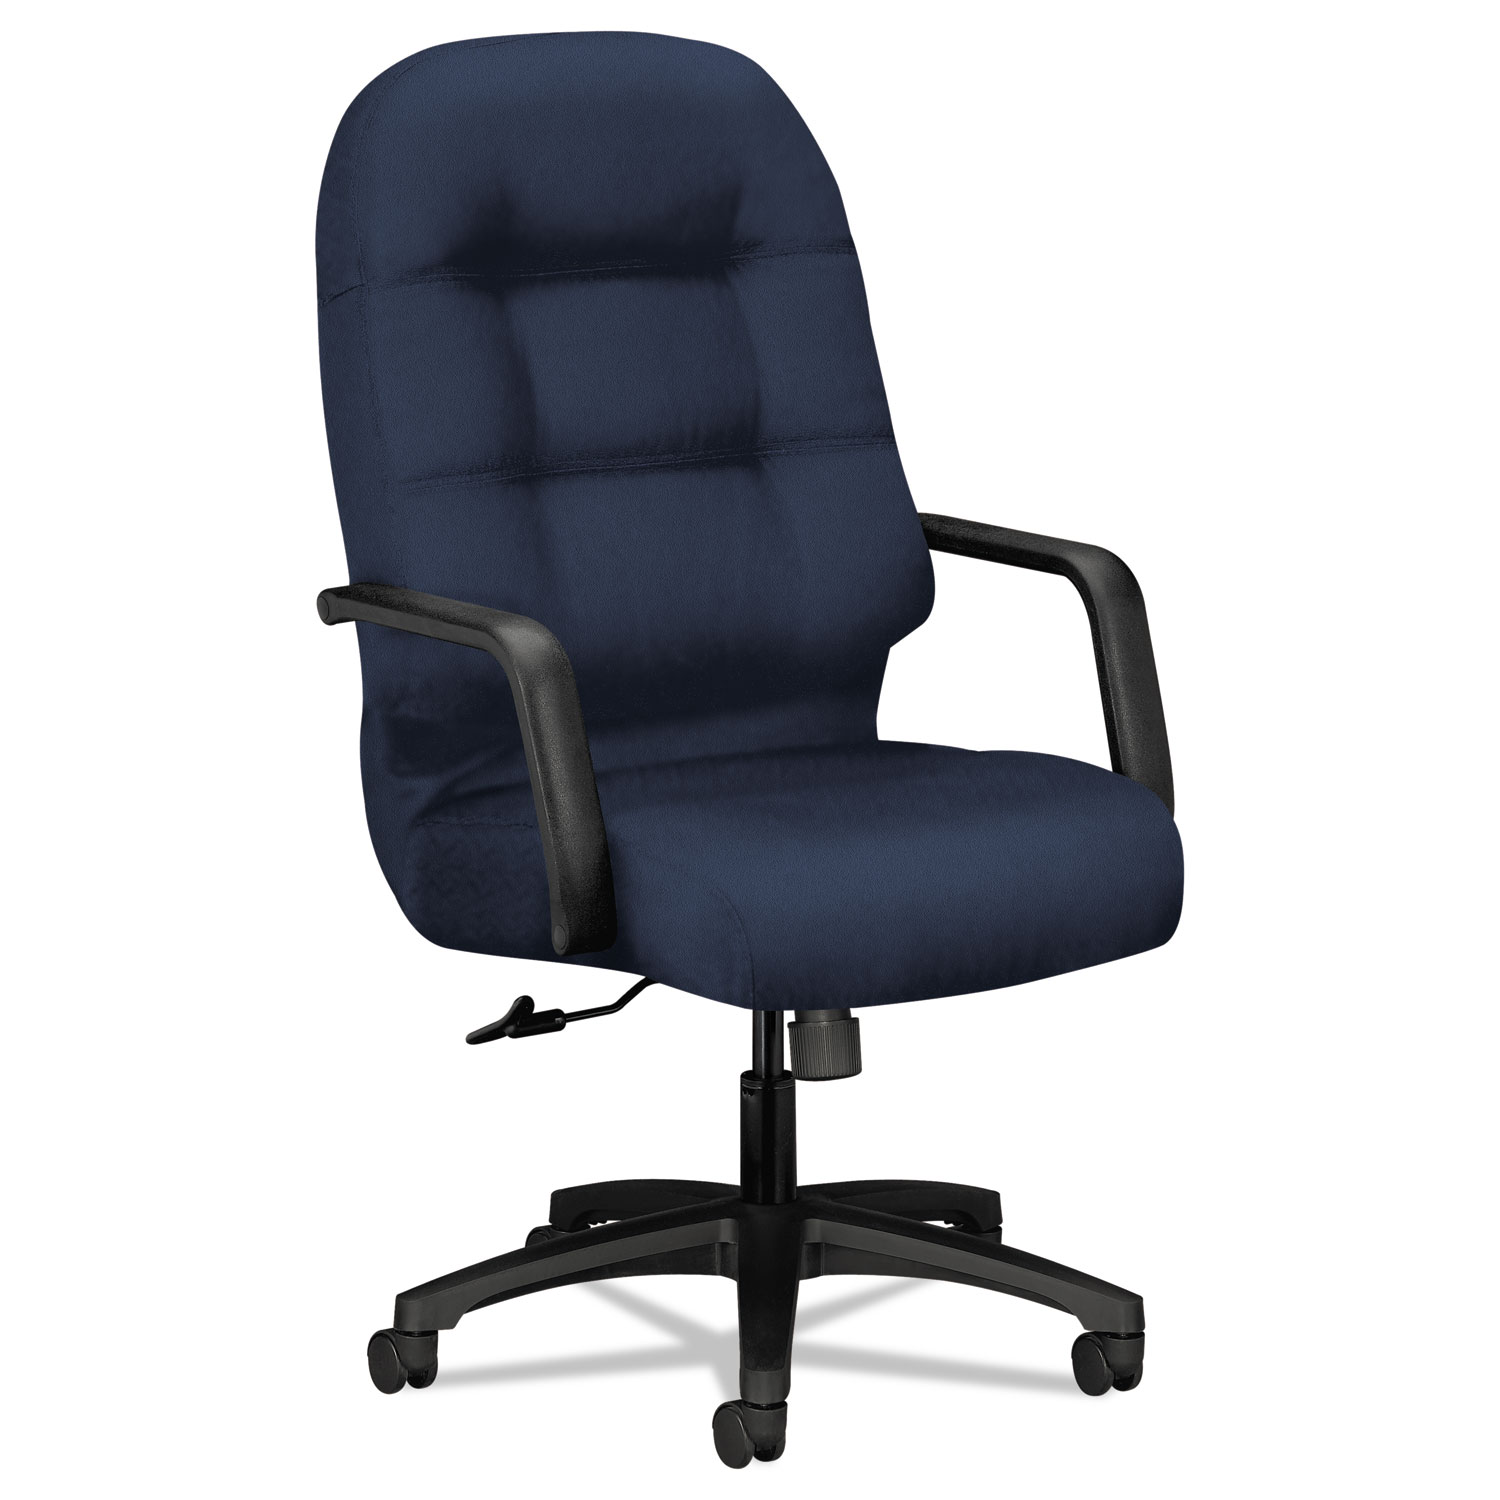  HON H2091.H.CU98.T Pillow-Soft 2090 Series Executive High-Back Swivel/Tilt Chair, Supports up to 300 lbs., Navy Seat/Navy Back, Black Base (HON2091CU98T) 